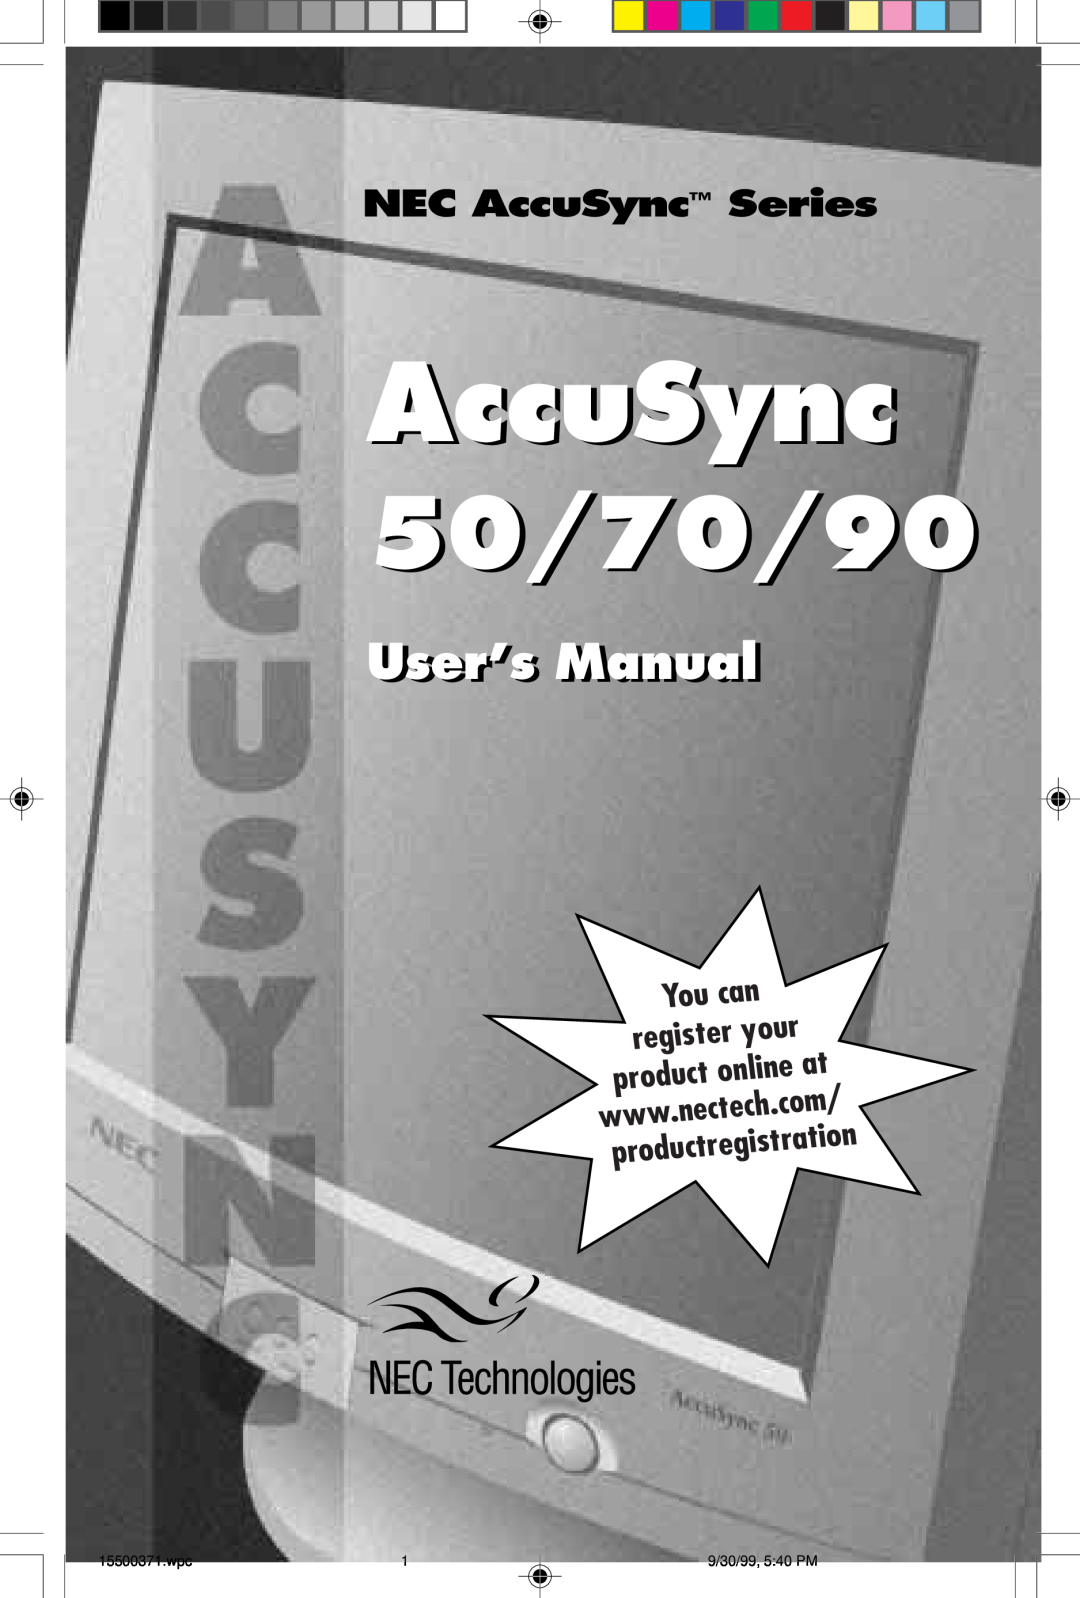 NEC N9501, N9701 user manual 50/70/90, User’s Manuall, NEC AccuSync Series, You can, your, online, nectech, product 